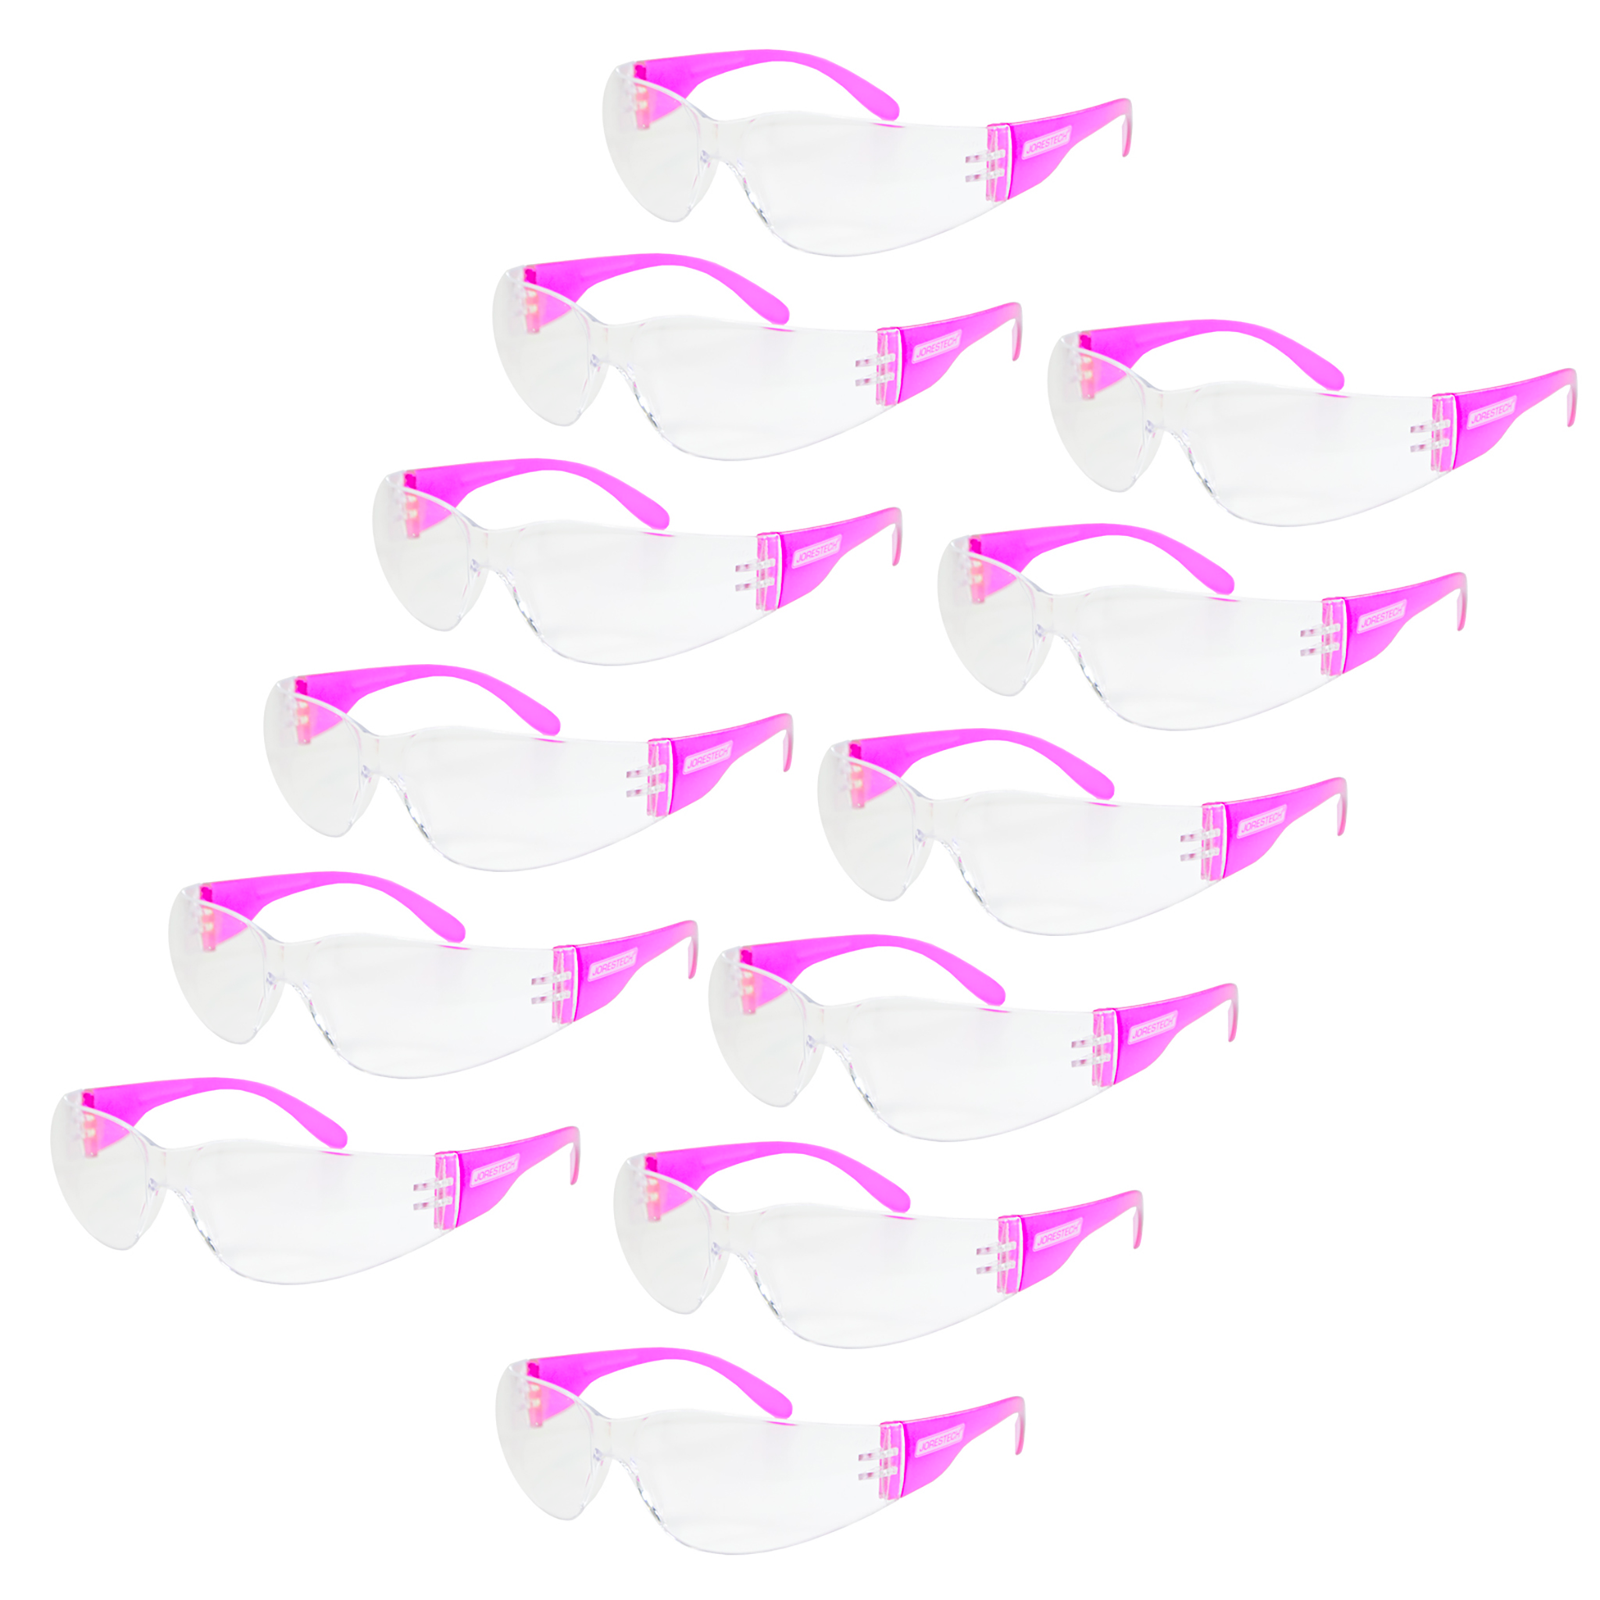 Shows 12 pairs of JORESTECH clear safety glasses with pink side shield for high impact protection. These ANSI compliant safety glasses have polycarbonate lenses. 